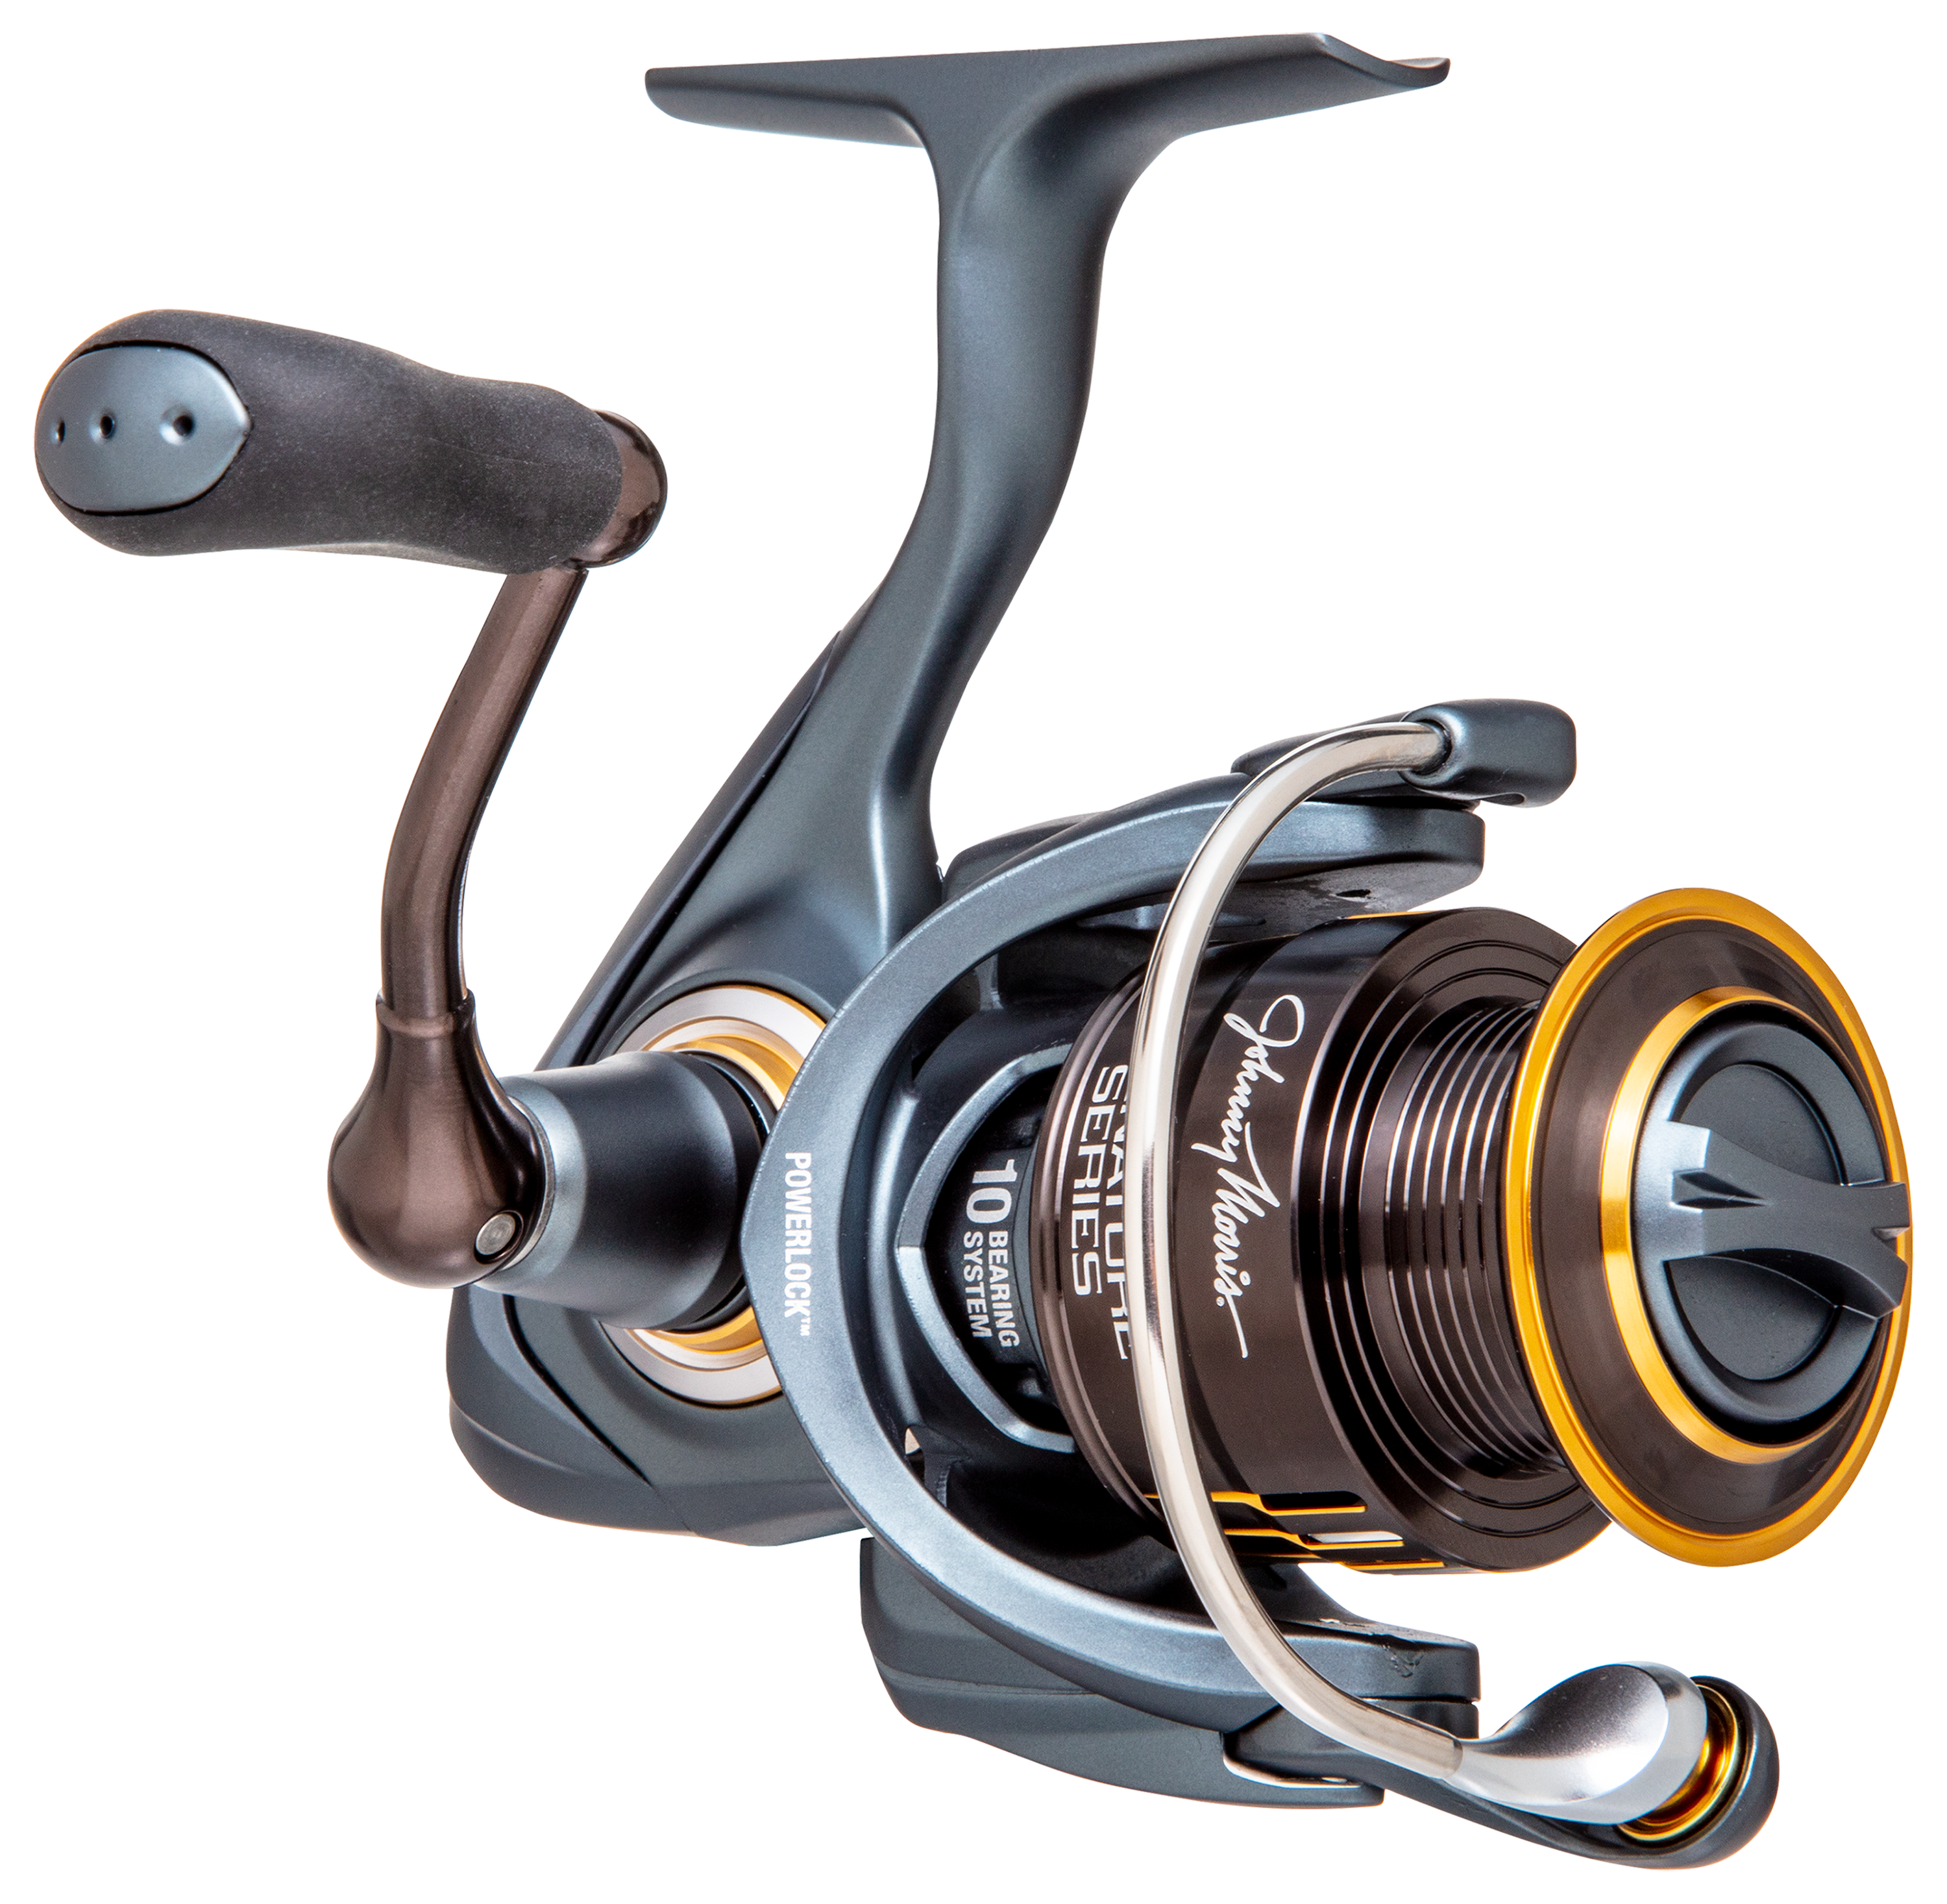 Bass Pro Shops Johnny Morris Signature Series Spinning Reel - 5.7:1 - Reel Size 4000